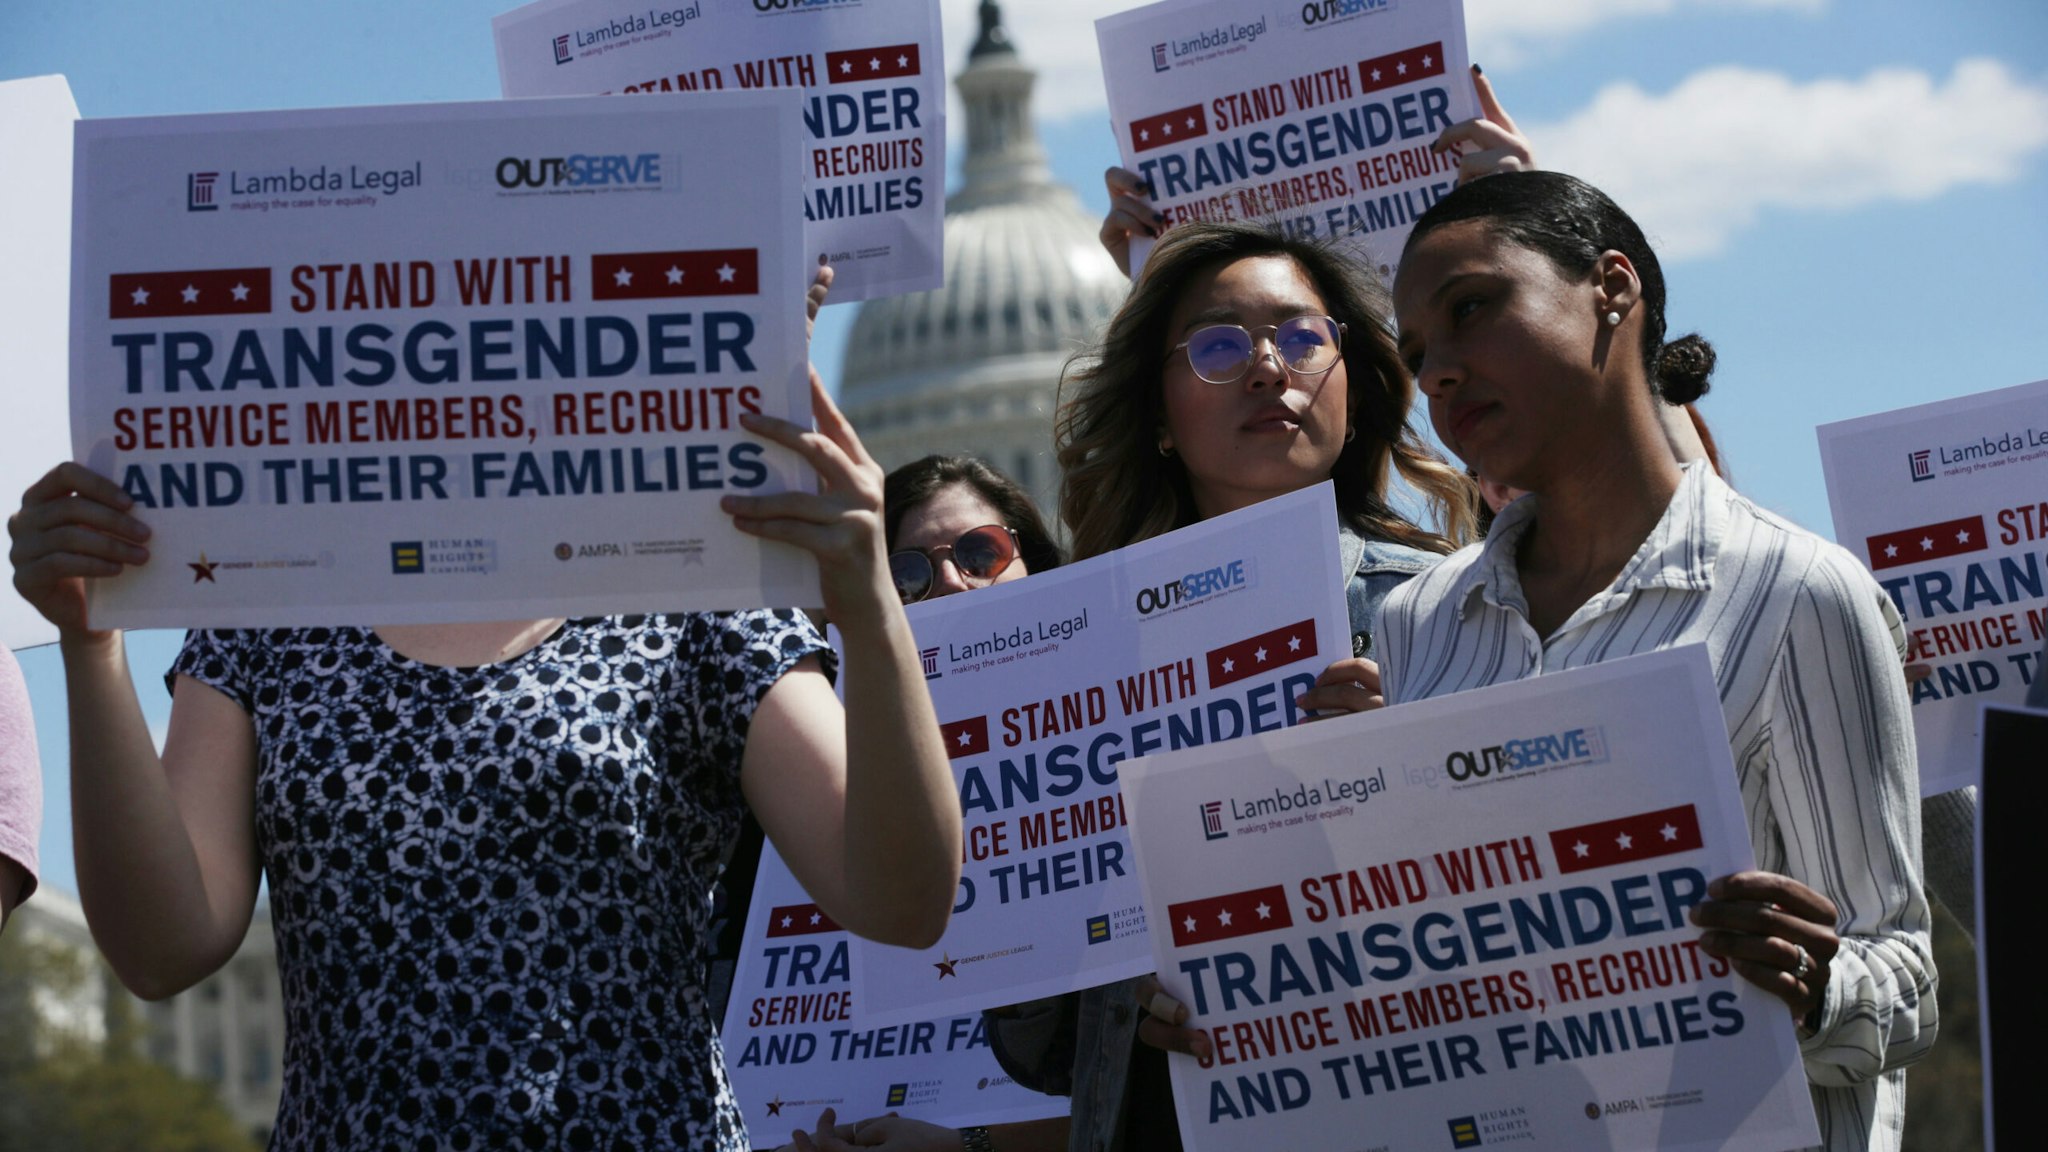 Activists participate in a rally at the Reflecting Pool of the U.S. Capitol April 10, 2019 in Washington, DC. Democratic lawmakers joined activists to rally against the transgender military service ban.